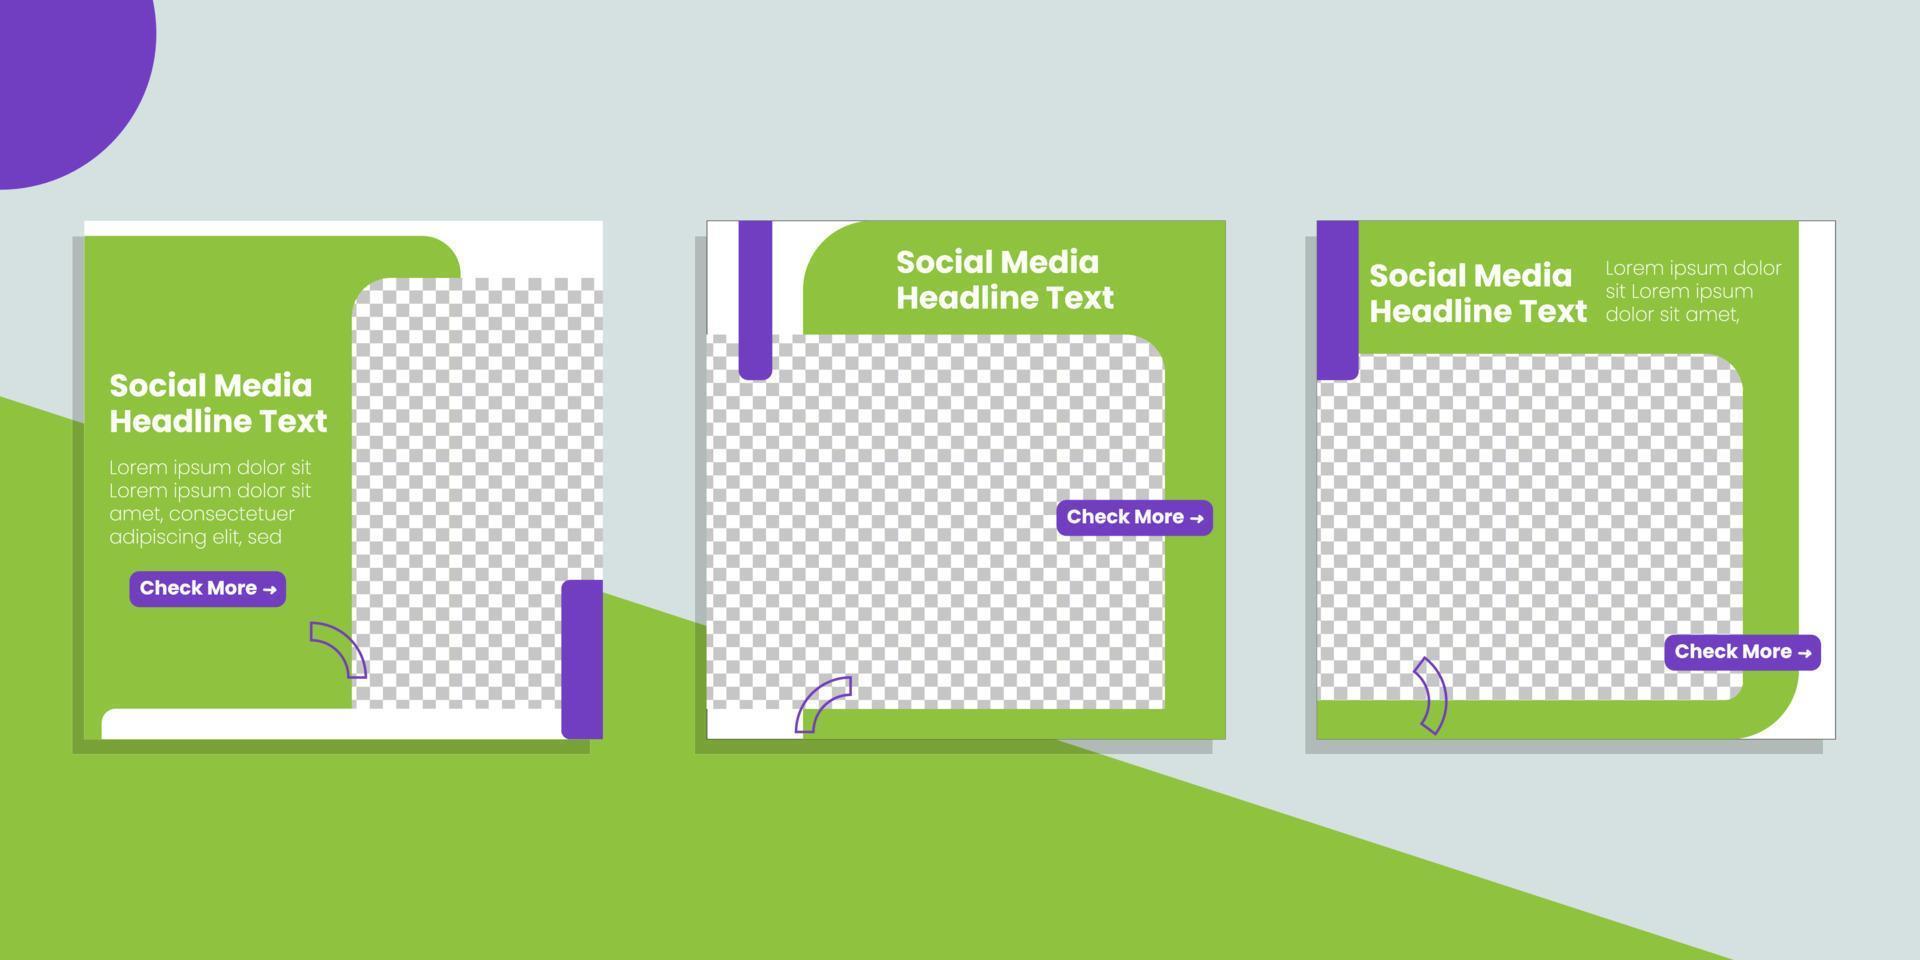 Memphis collection of creative social media post templates with infographics. green and purple, suitable for social media managers, graphic designers, students, and all other social media users vector